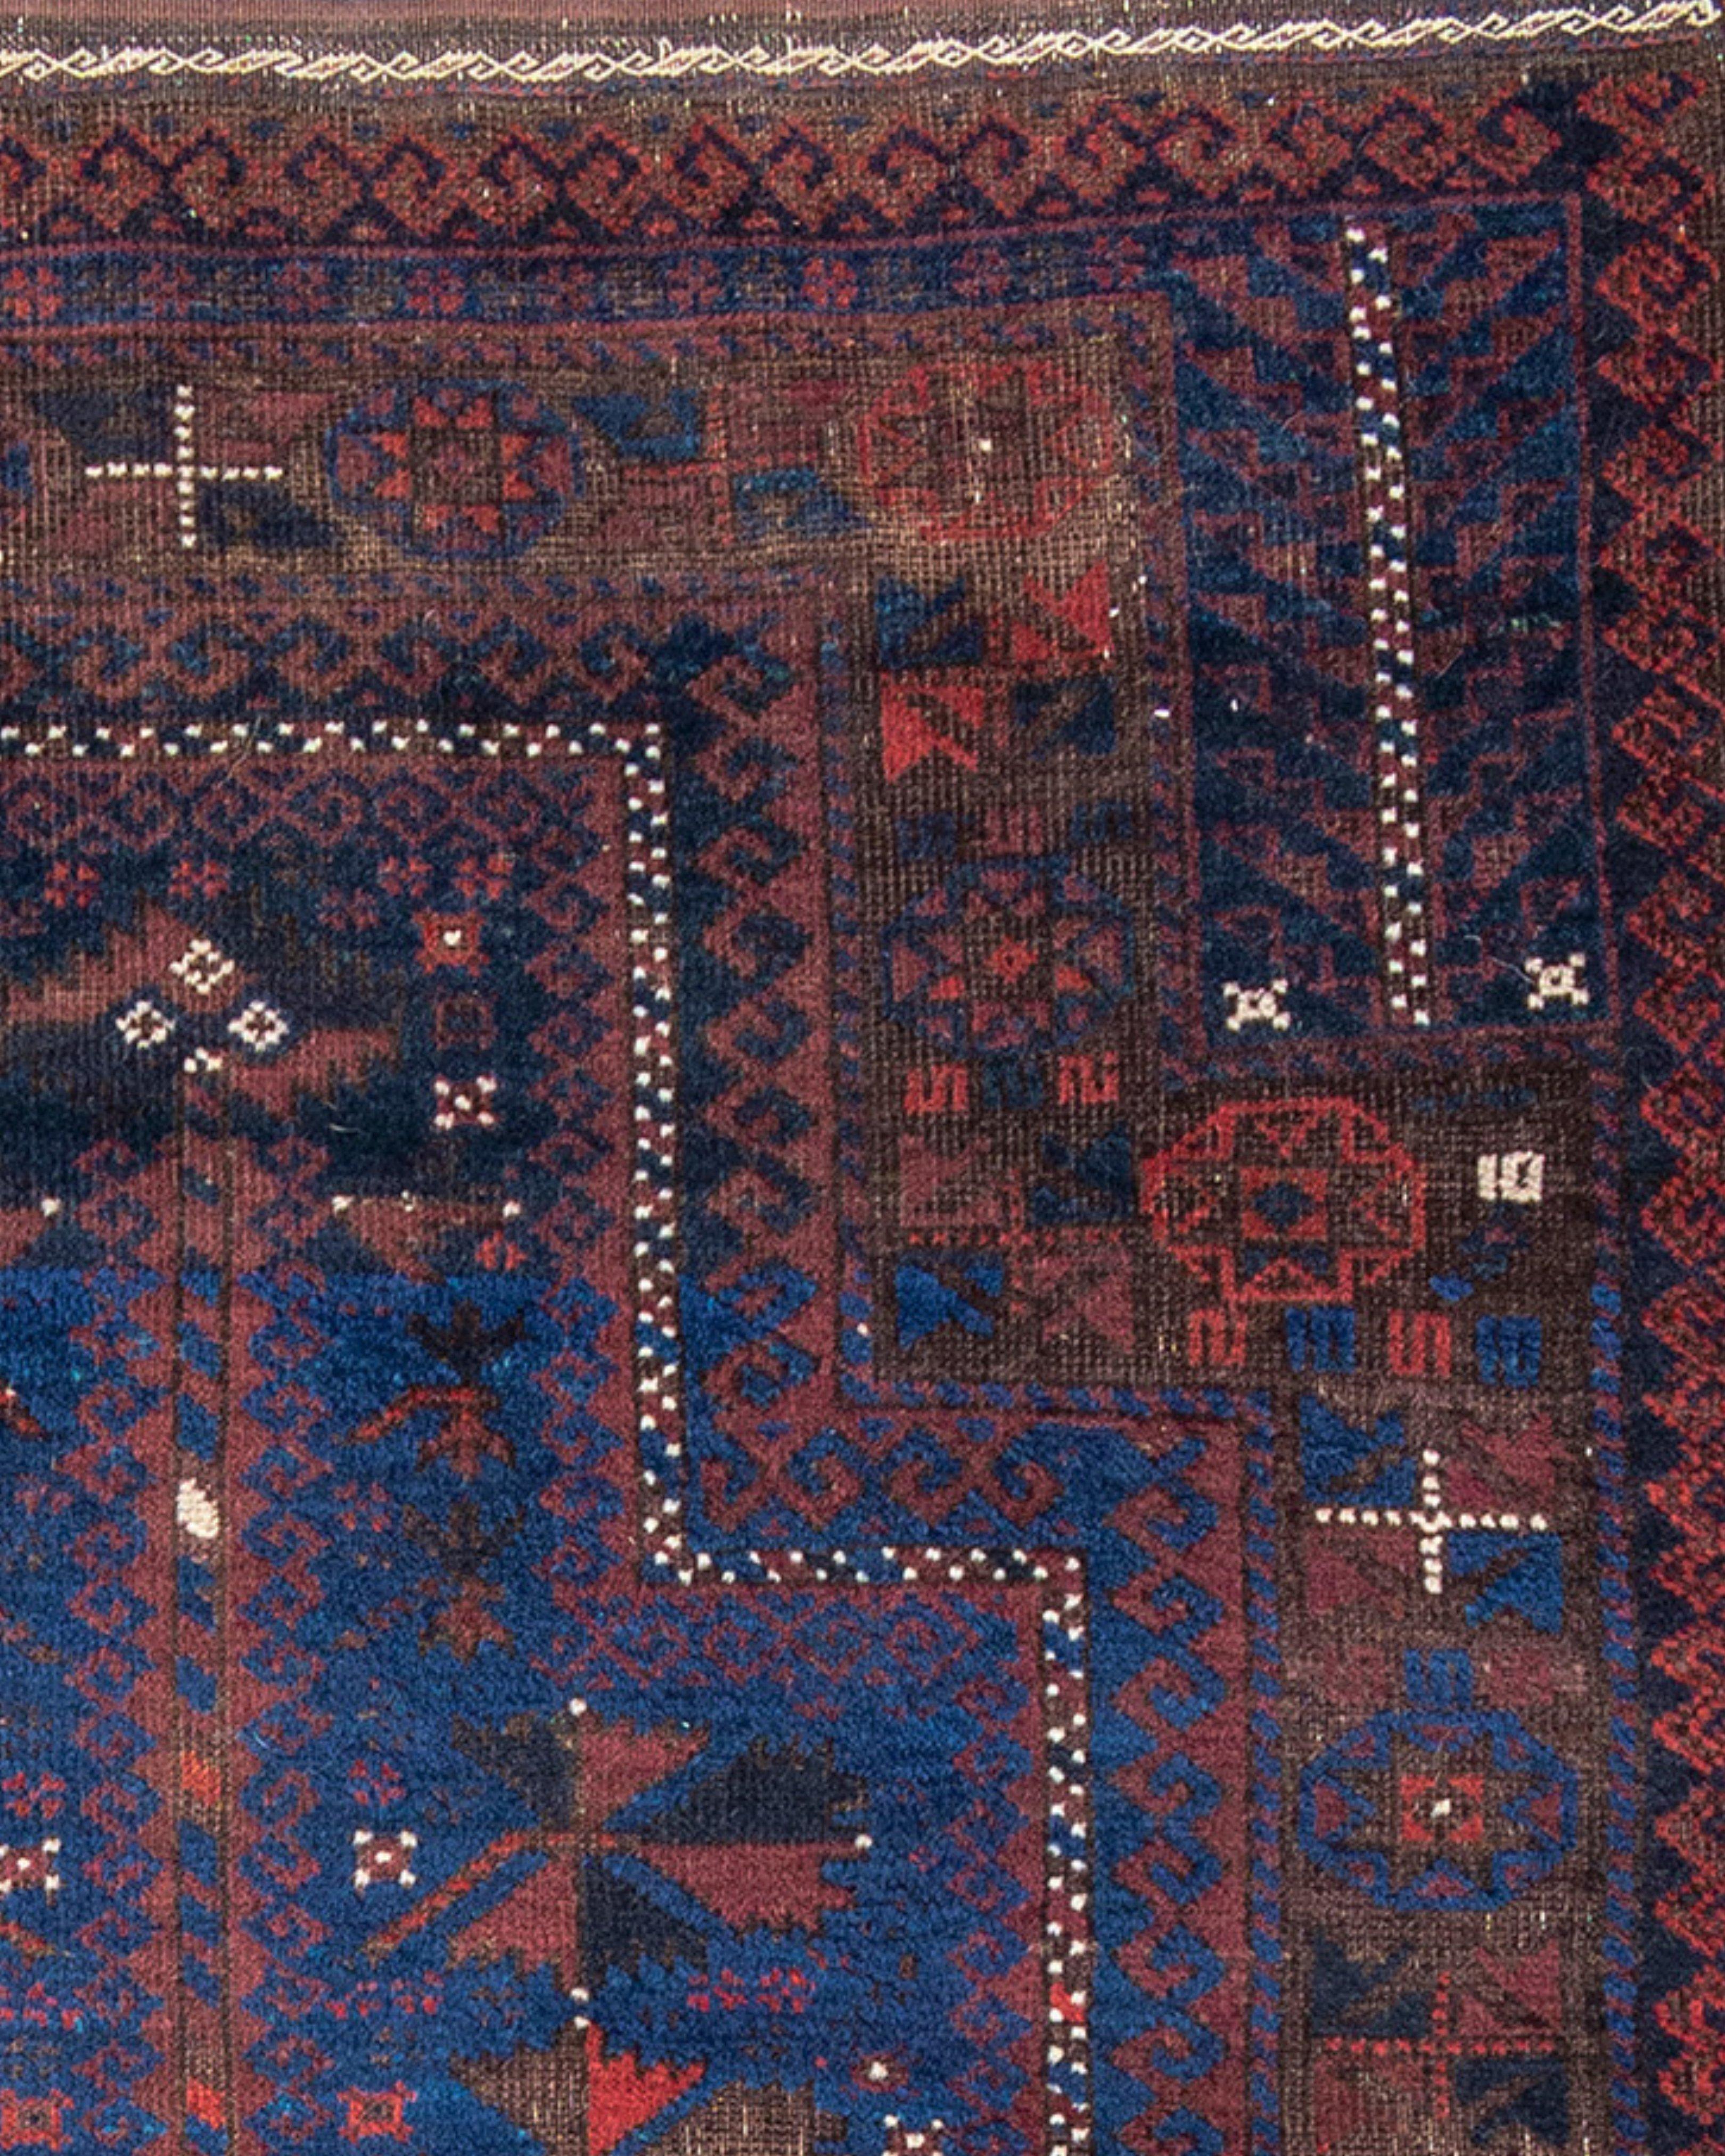 Antique Afghan Baluch Prayer Rug, Late 19th Century

A spaciously drawn blue ground prayer rug, possibly from northeast Persia. The complex primary border suggests the provenance; as such drawing is rarely (if ever?) seen in examples from the Afghan